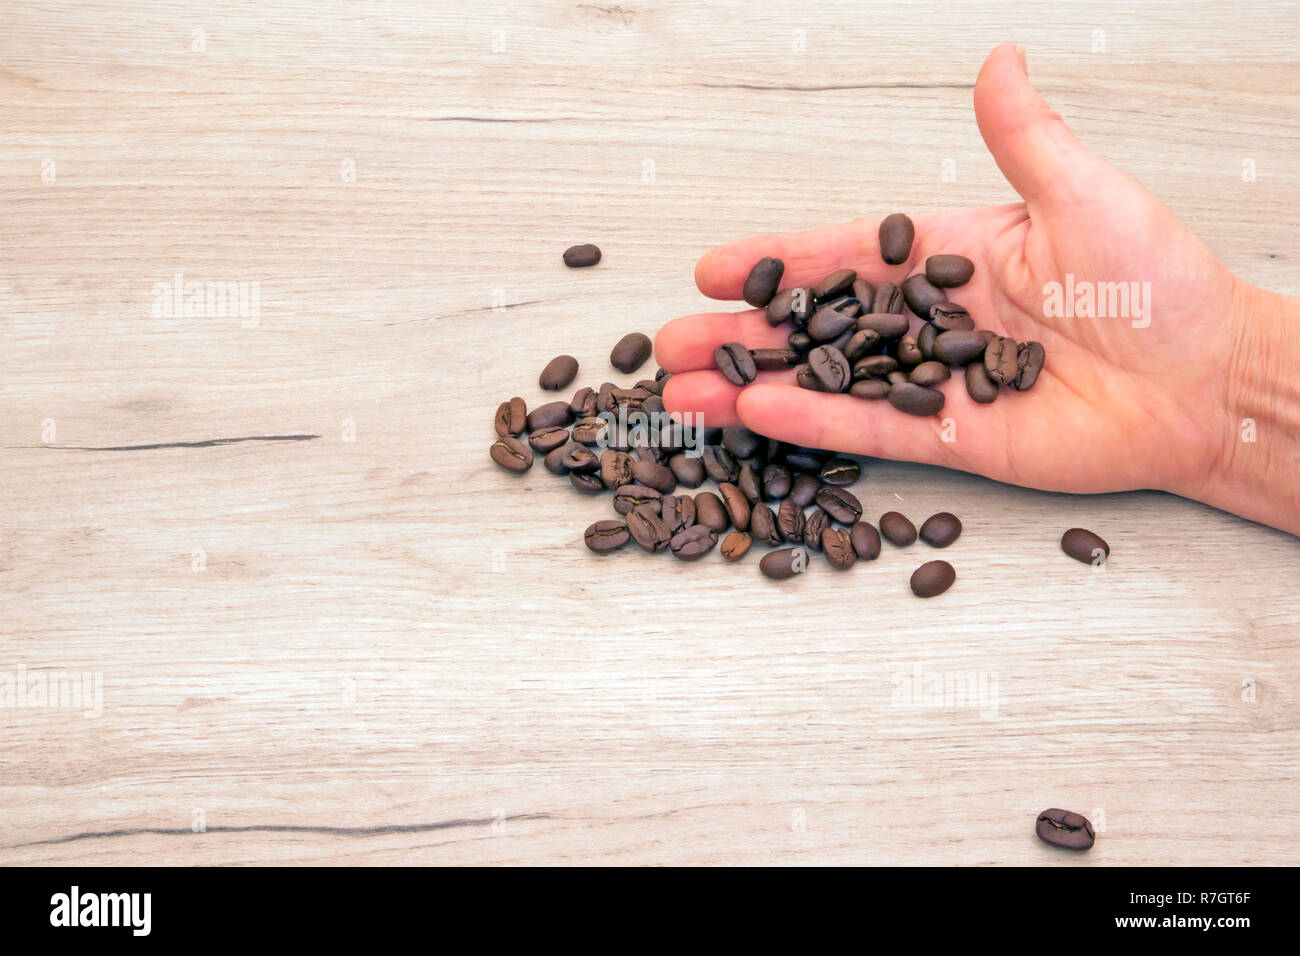 Human hand holding roasted coffee beans, other beans scattered on a wooden board Stock Photo